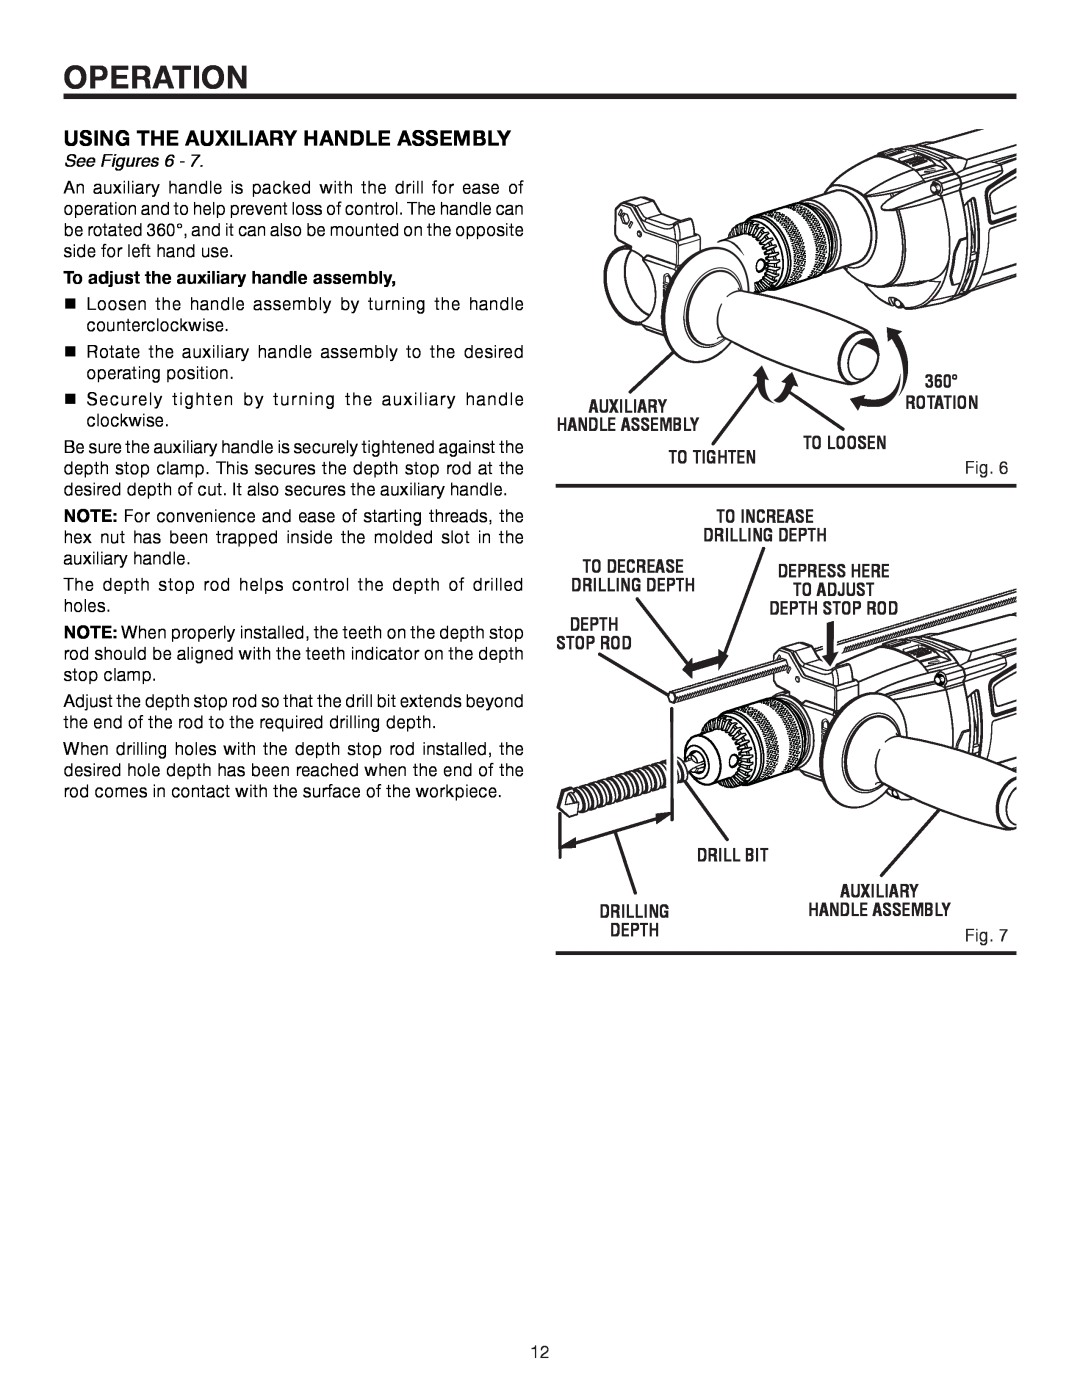 RIDGID R5013 Operation, Using The Auxiliary Handle Assembly, See Figures, To adjust the auxiliary handle assembly, Depth 